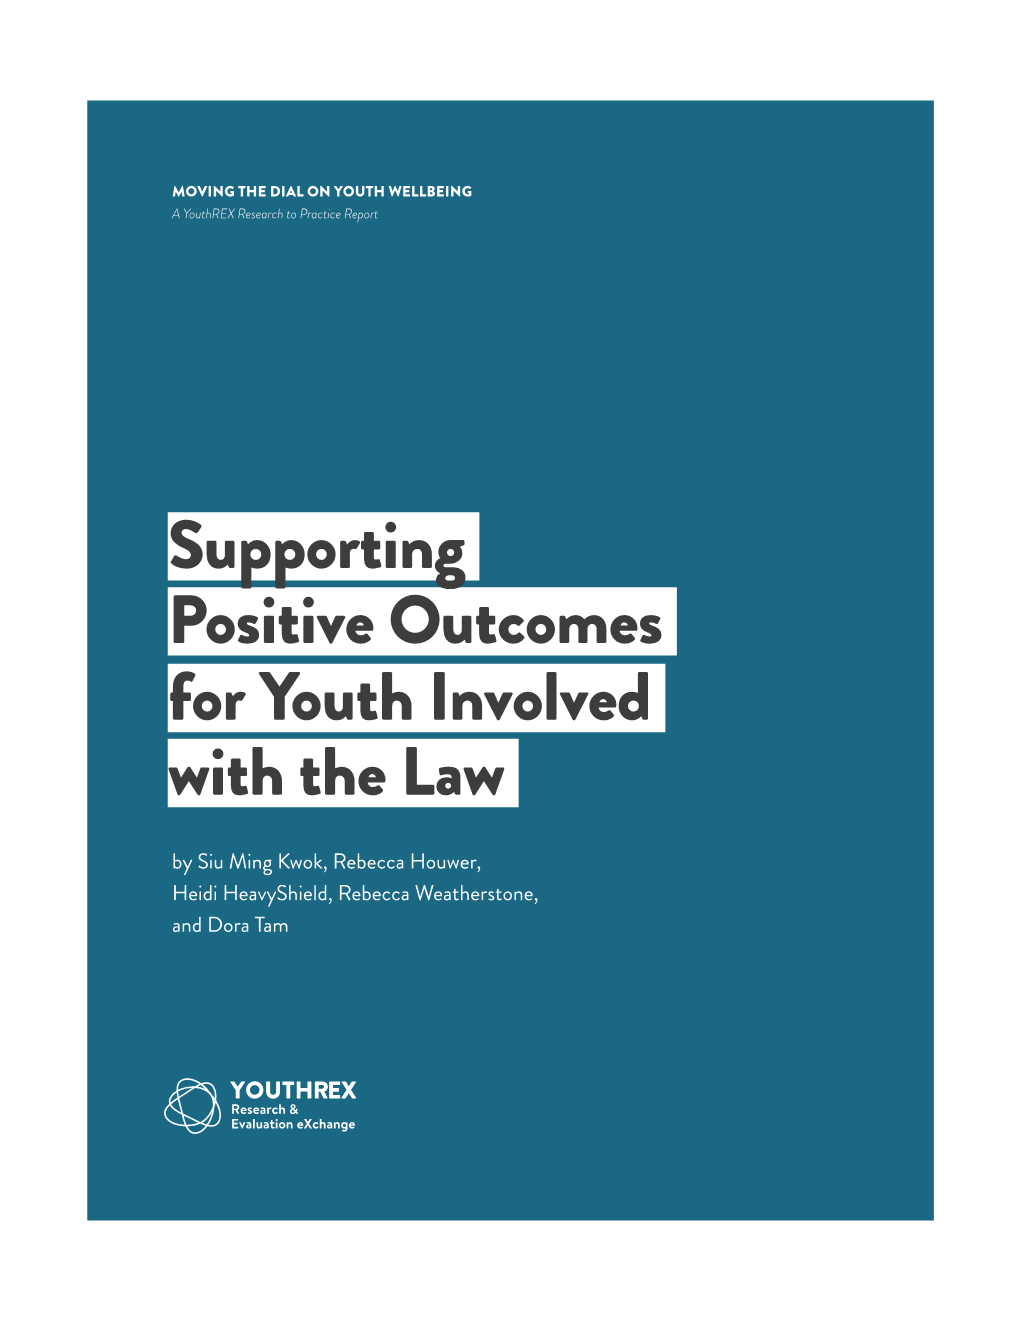 Supporting Positive Outcomes for Youth Involved with the Law by Siu Ming Kwok, Rebecca Houwer, Heidi Heavyshield, Rebecca Weatherstone, and Dora Tam